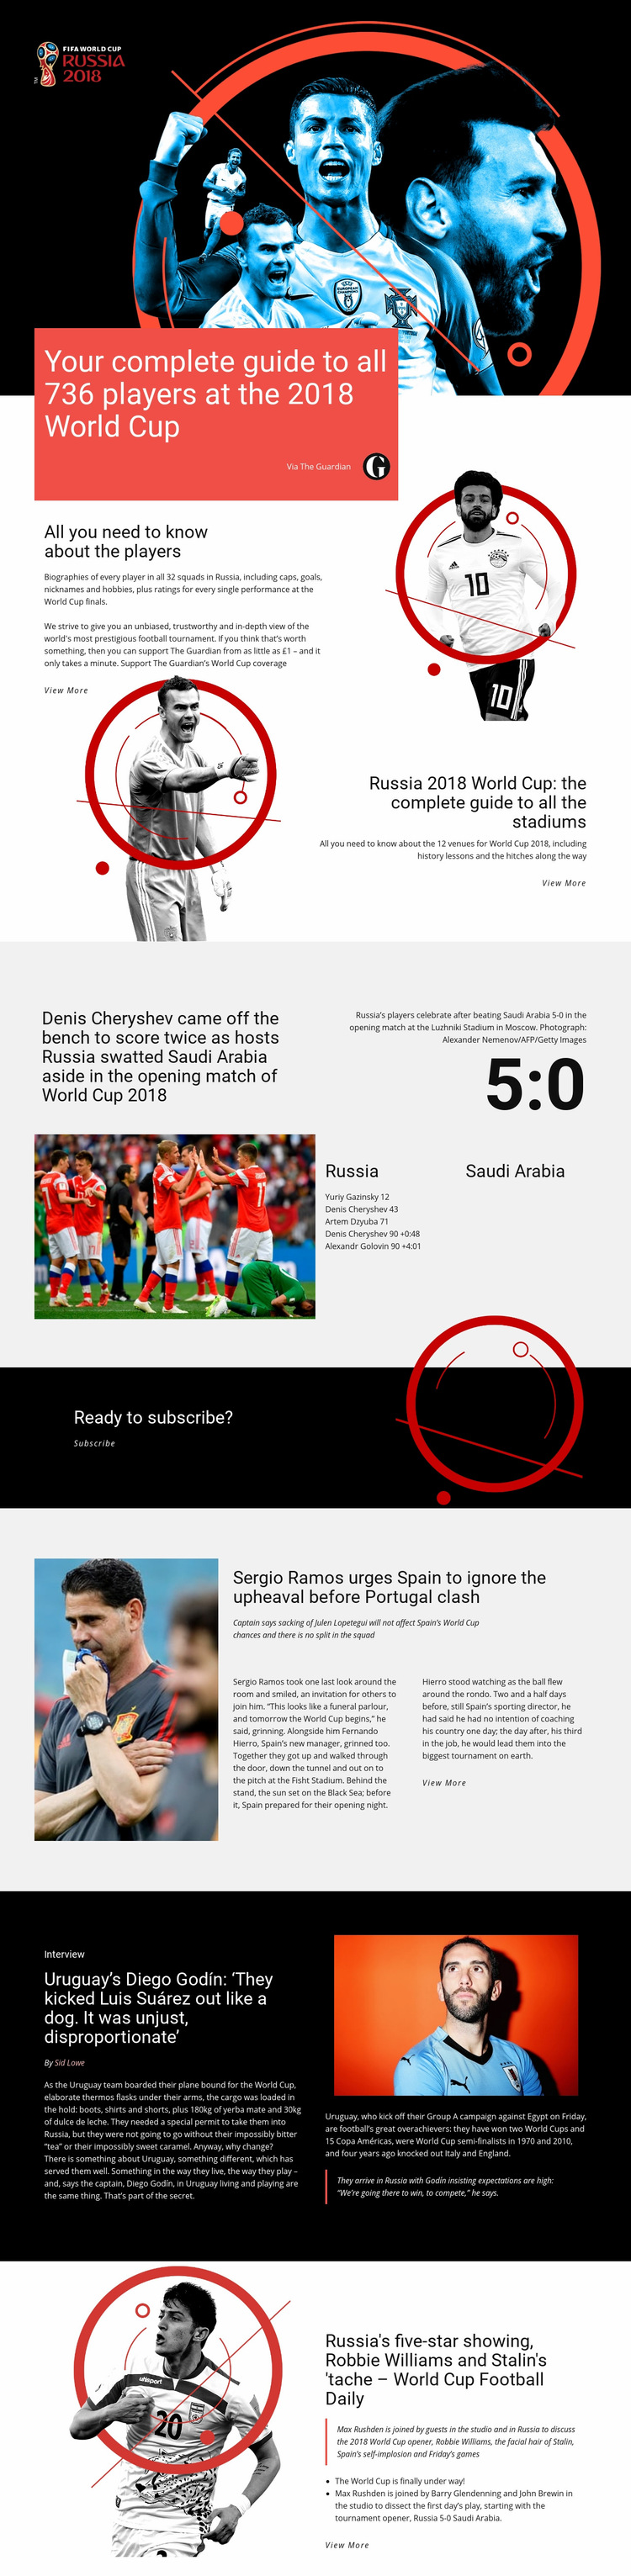 World Cup Web Page Design